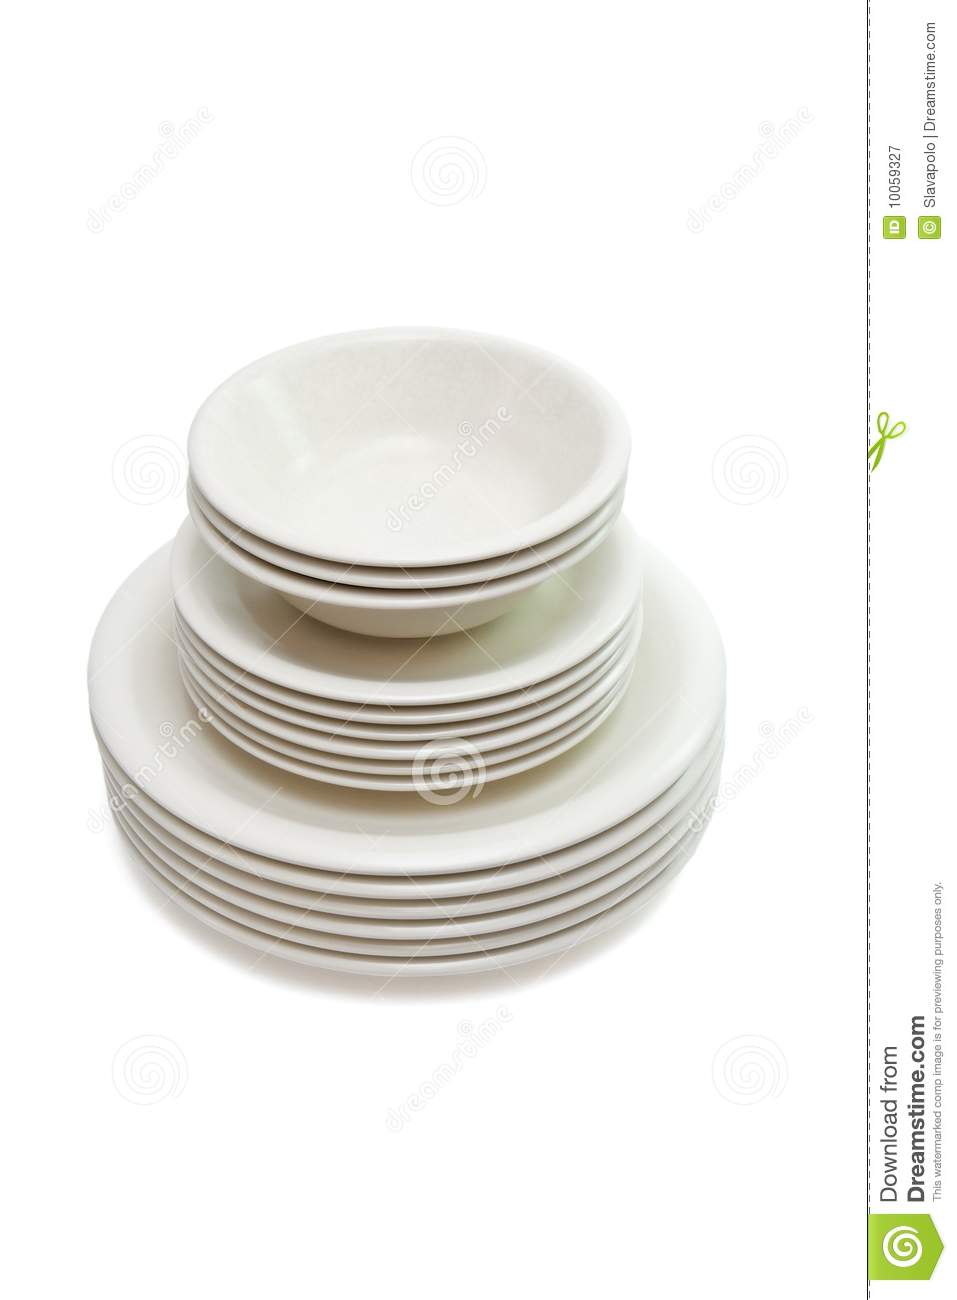 Stack Of Plain Beige Dinner Plates Soup Plates And Saucers Isolated 